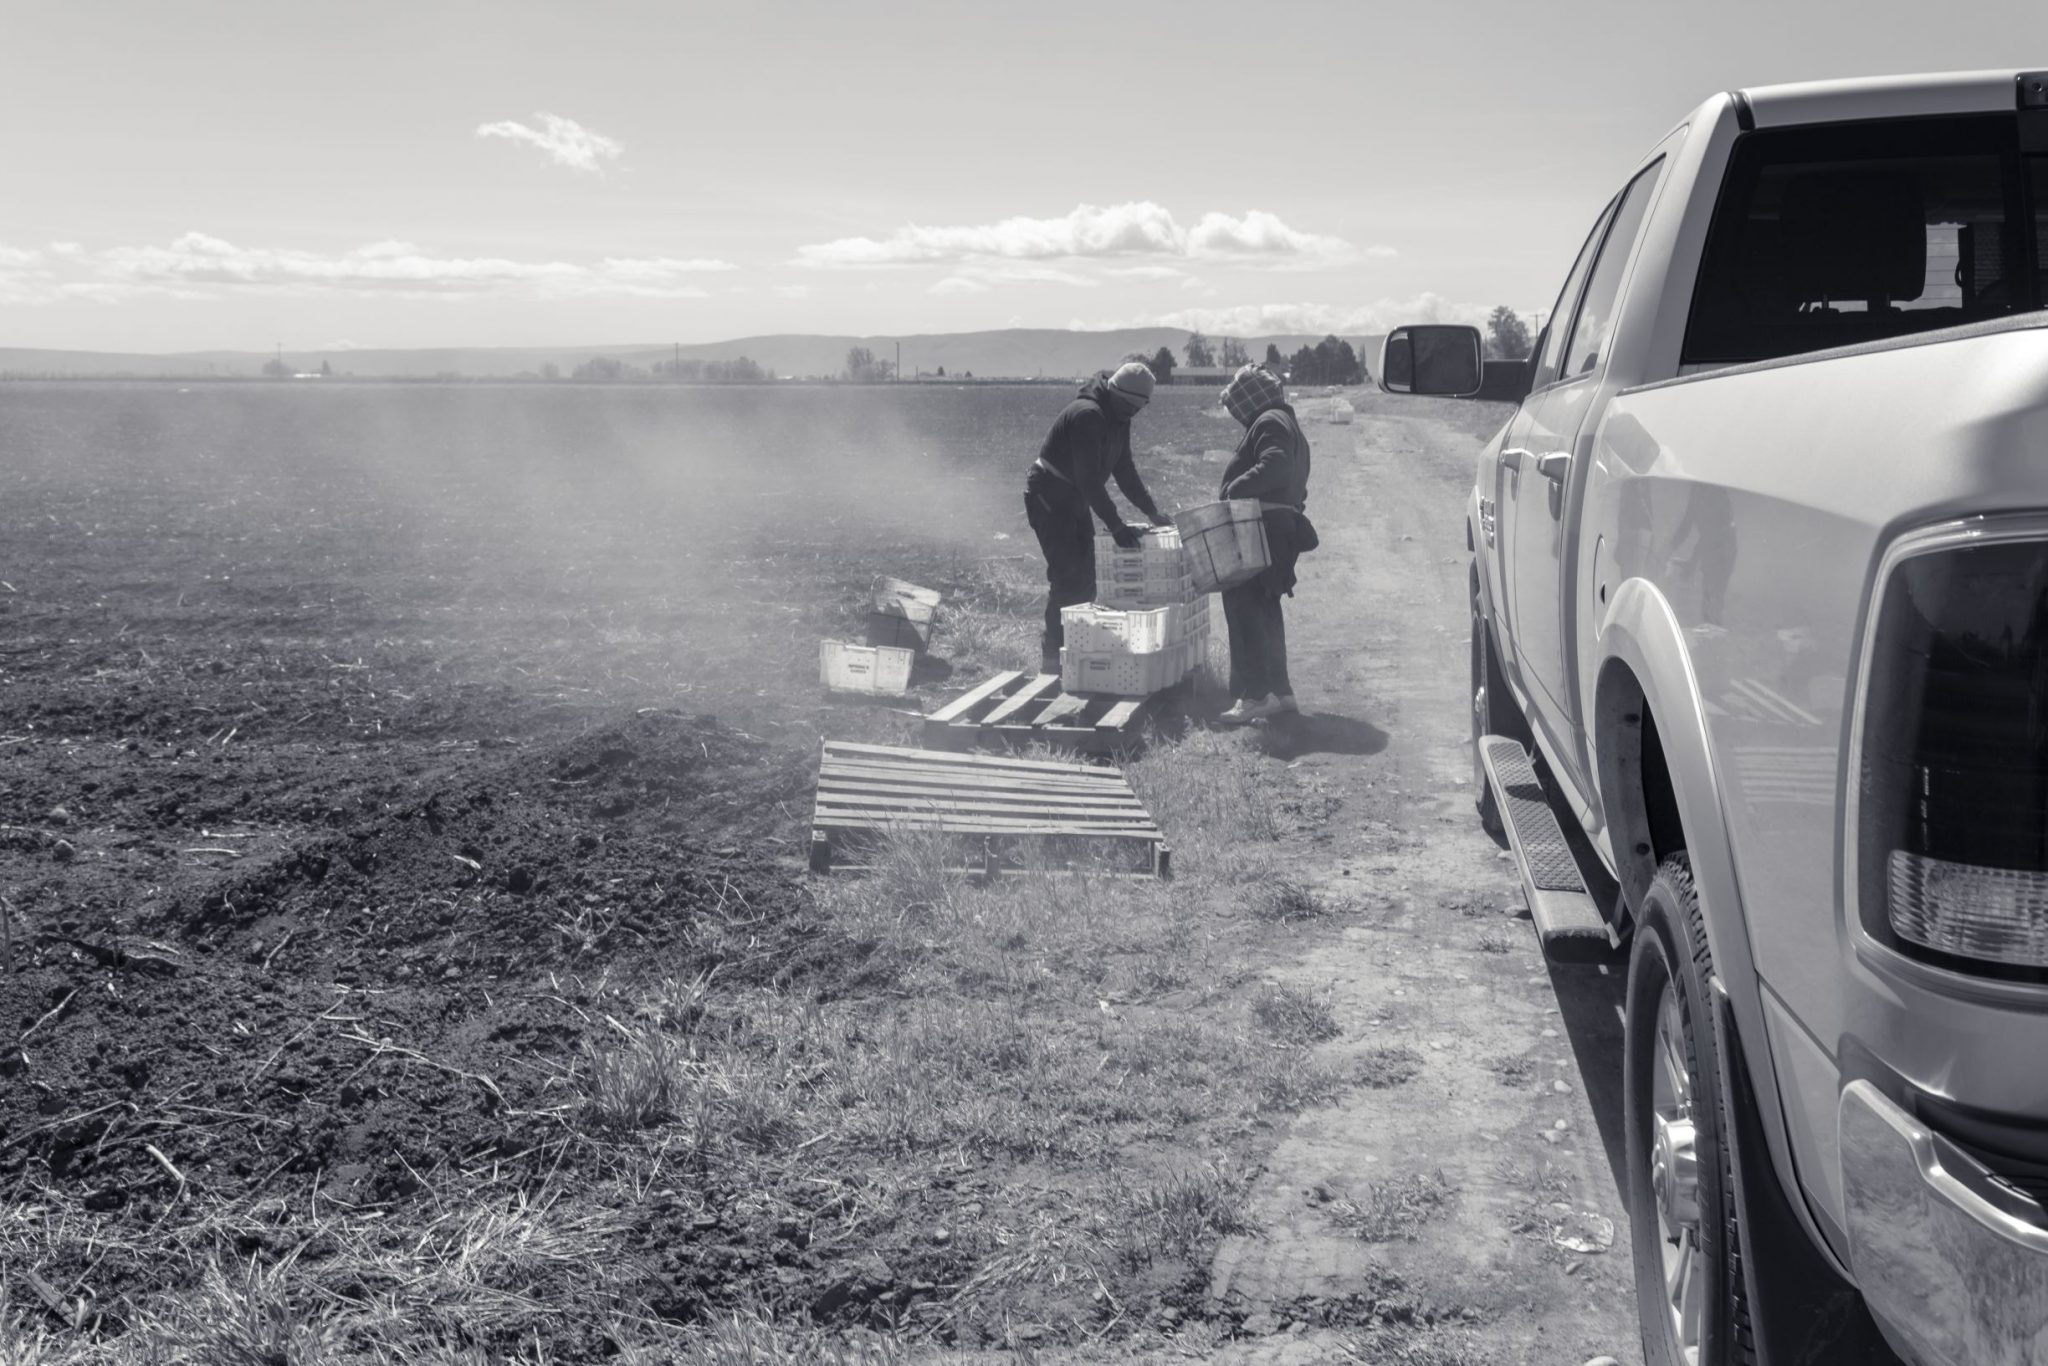 A dusty field on a sunny, windy day. Two people are bundled up against the wind and sun and loading containers with asparagus. On the right is a new pickup truck.